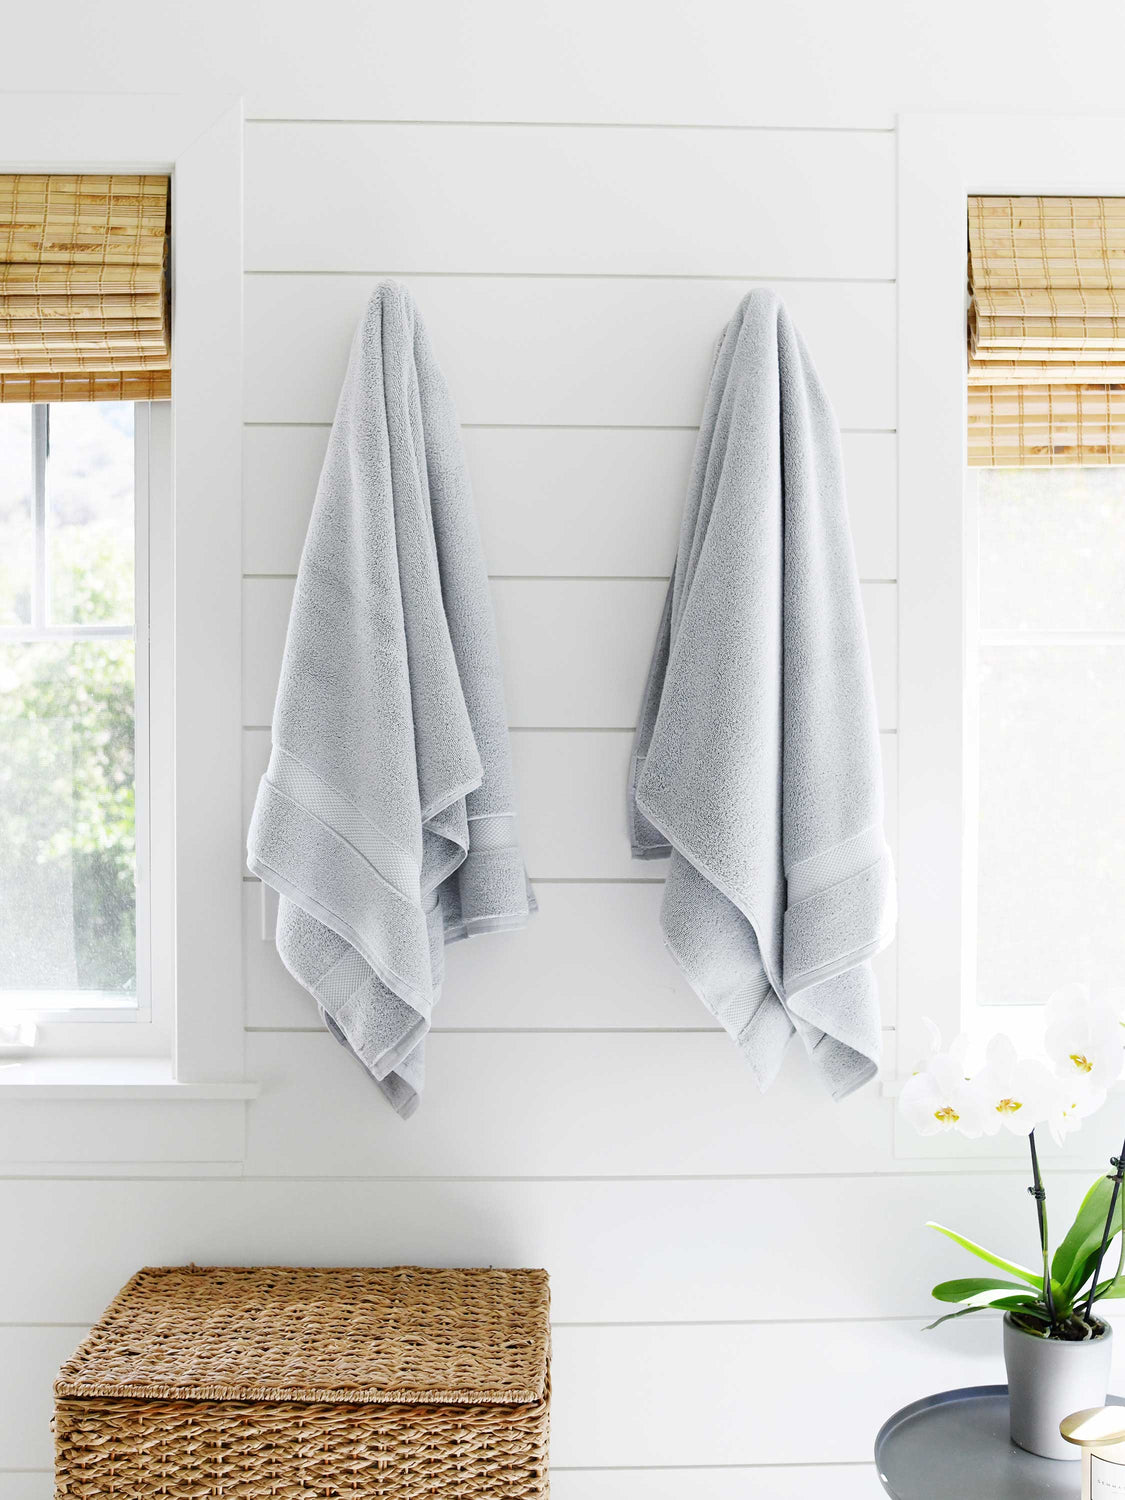 A pair of cloud gray supima cotton bath towels hanging on the a side by side.